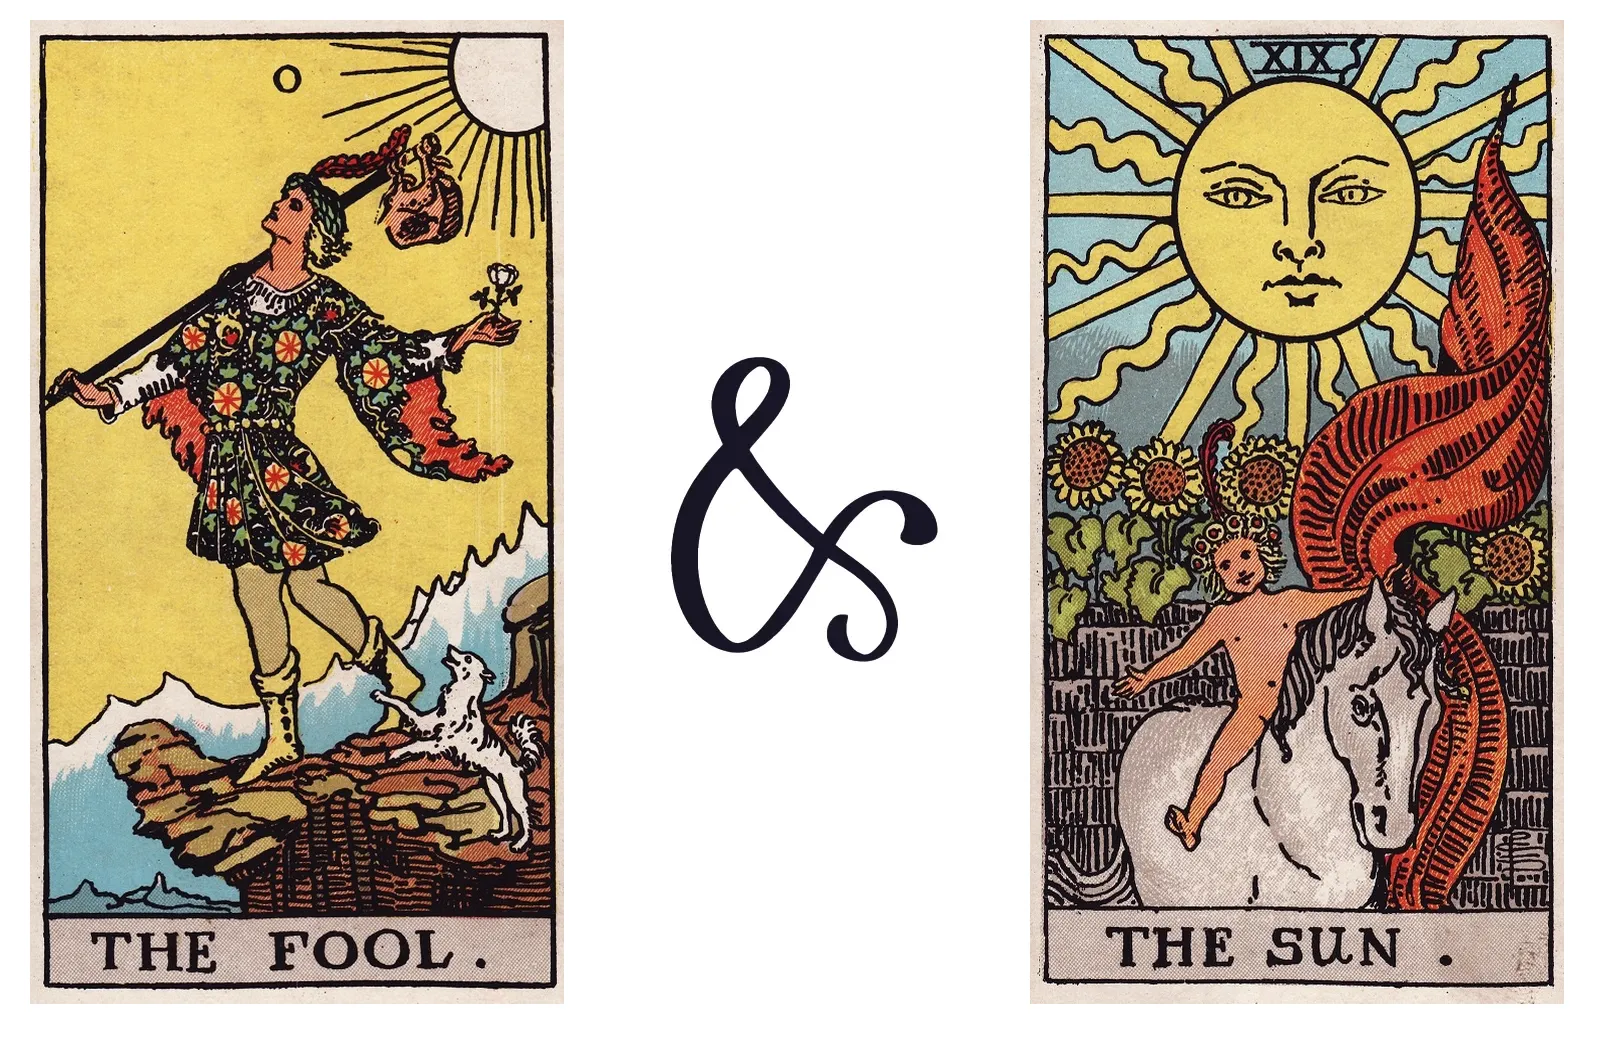 The Fool and The Sun